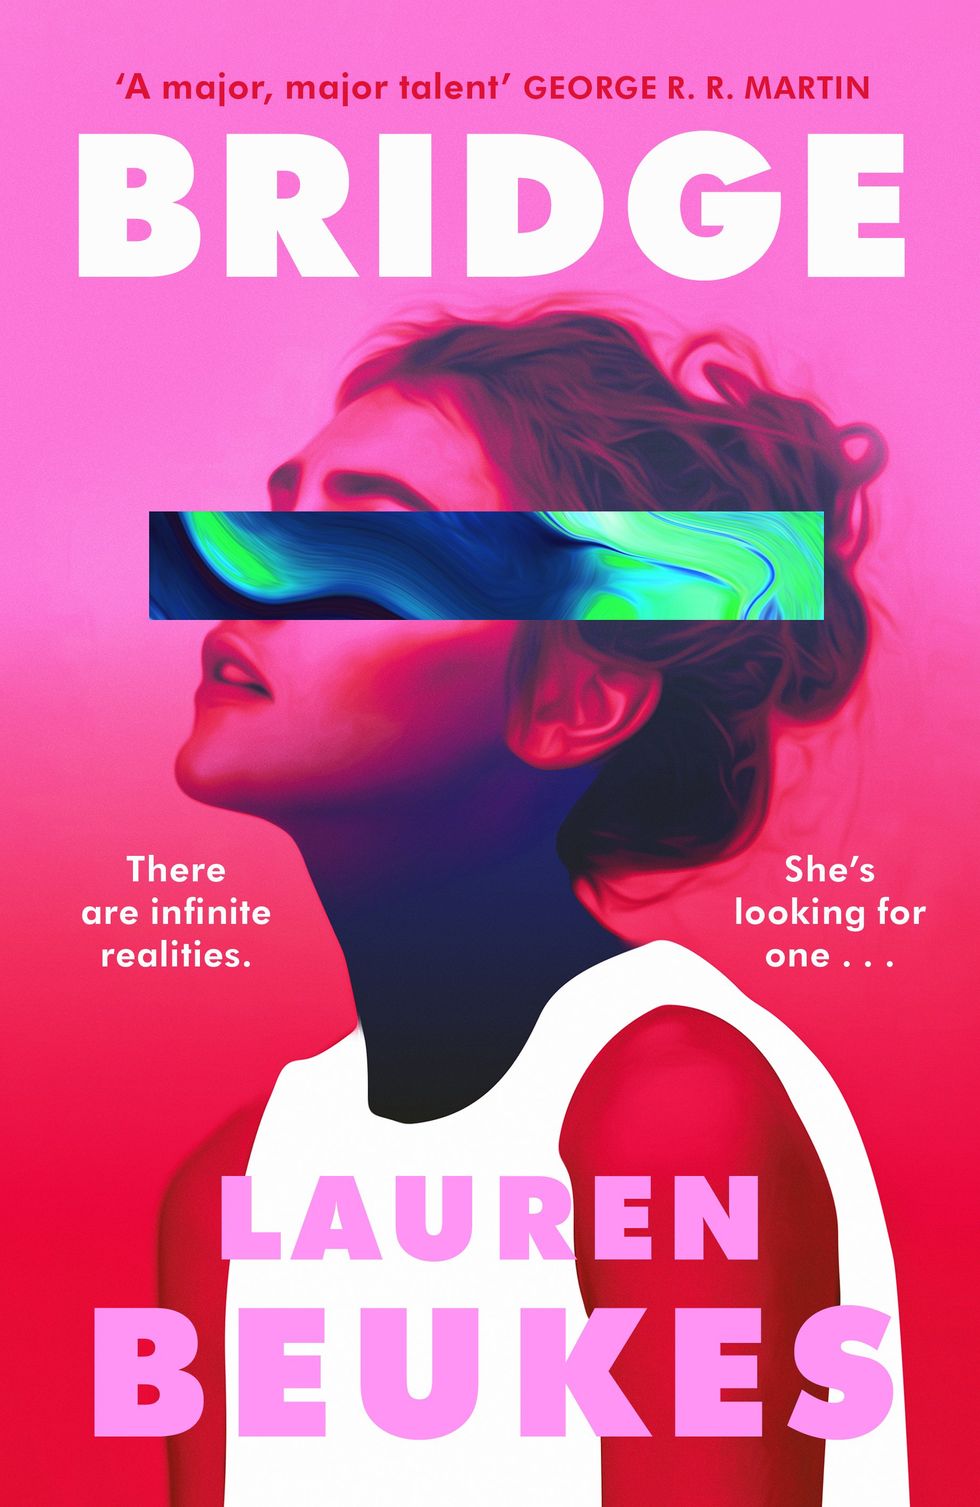 An image of the book cover, which features a woman in side profile with a multi-colored stripe across her eyes.